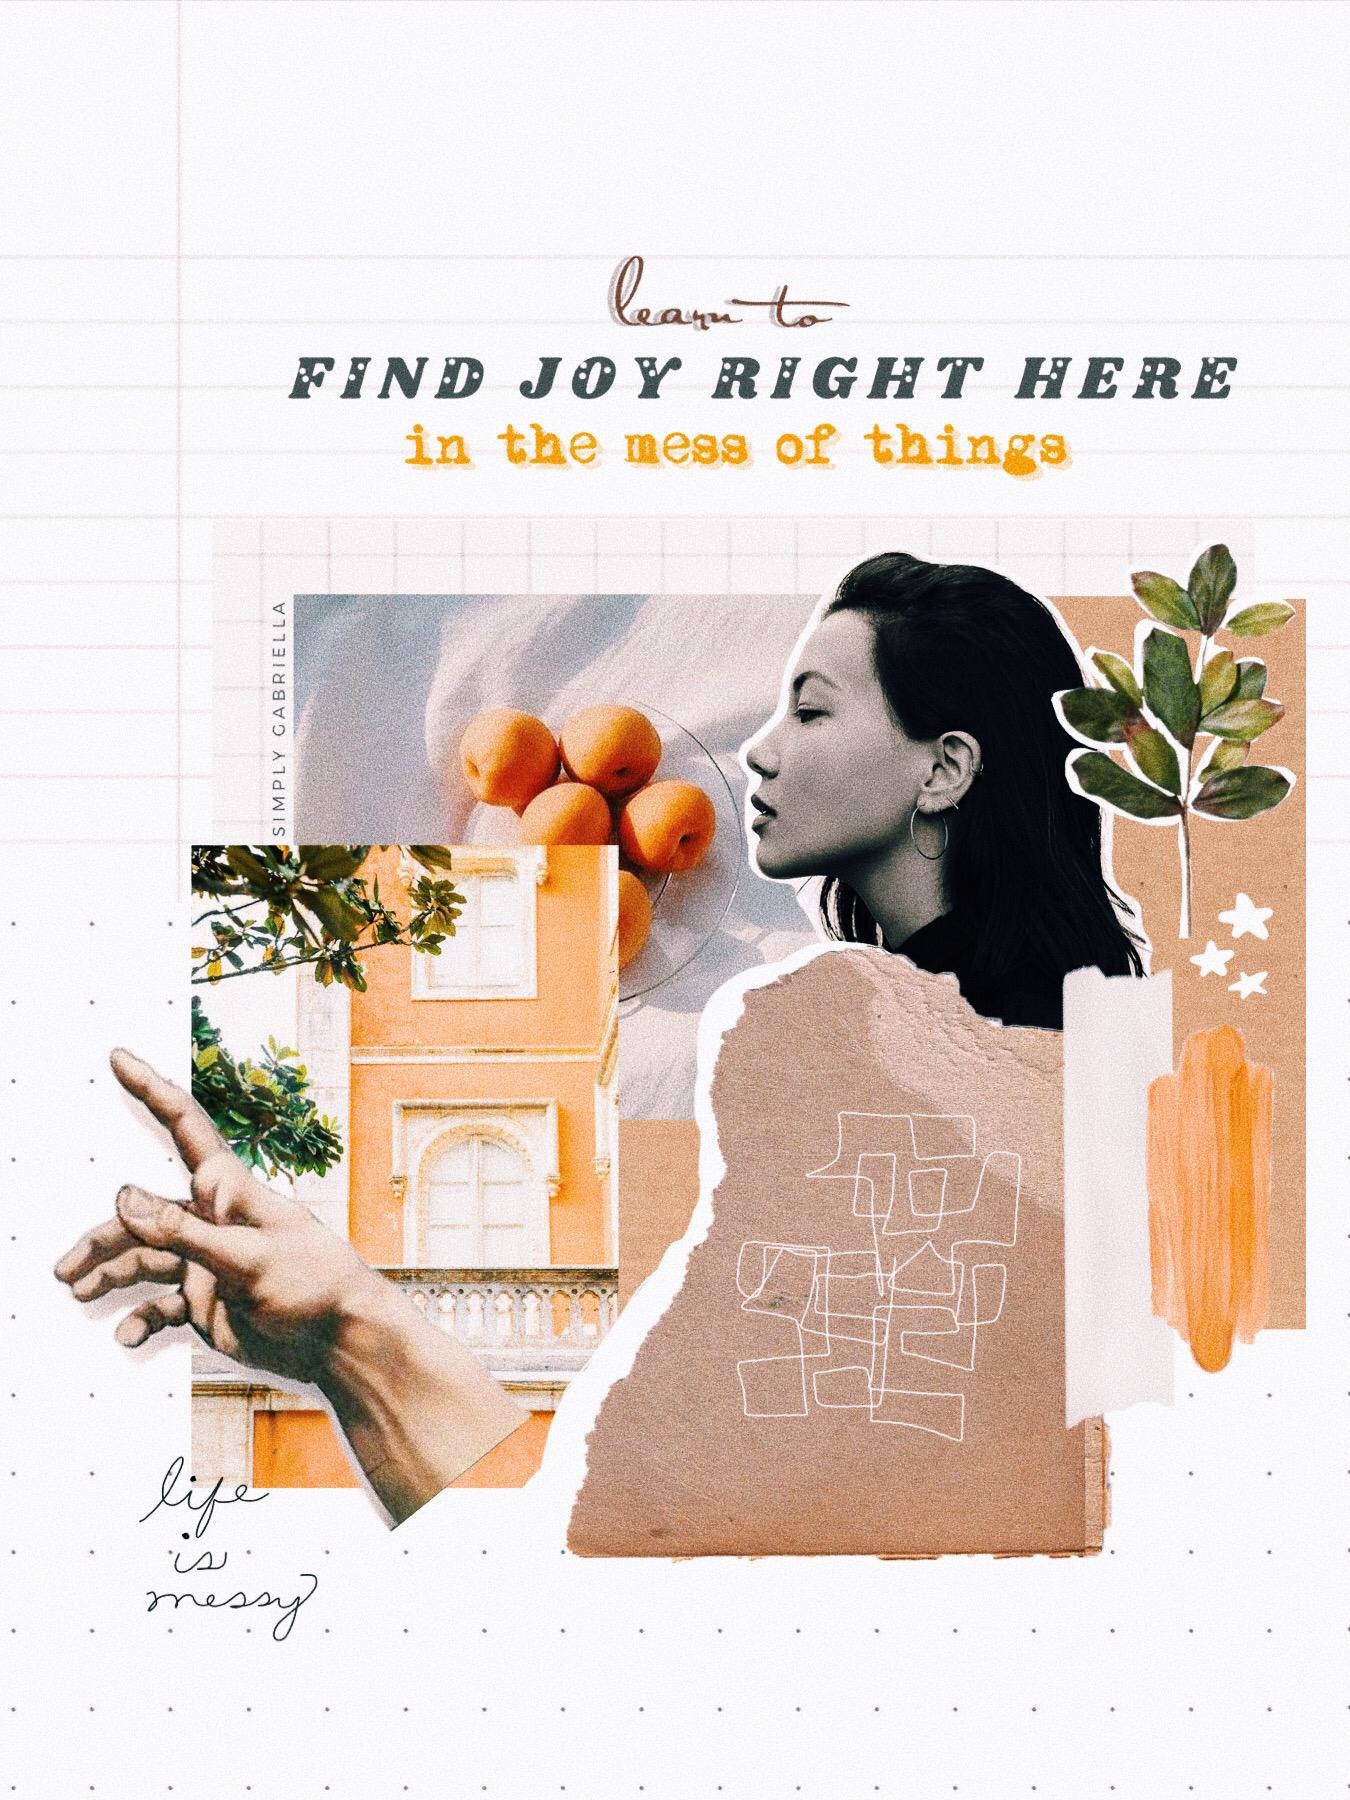 [ t a p ] 
heyy hope you’re week is going well! this collage was inspired by many different styles on pc, pinterest, etc :) ive had a lot of free time lately because my school is cancelled because of the coronavirus so ive been working on some new collage